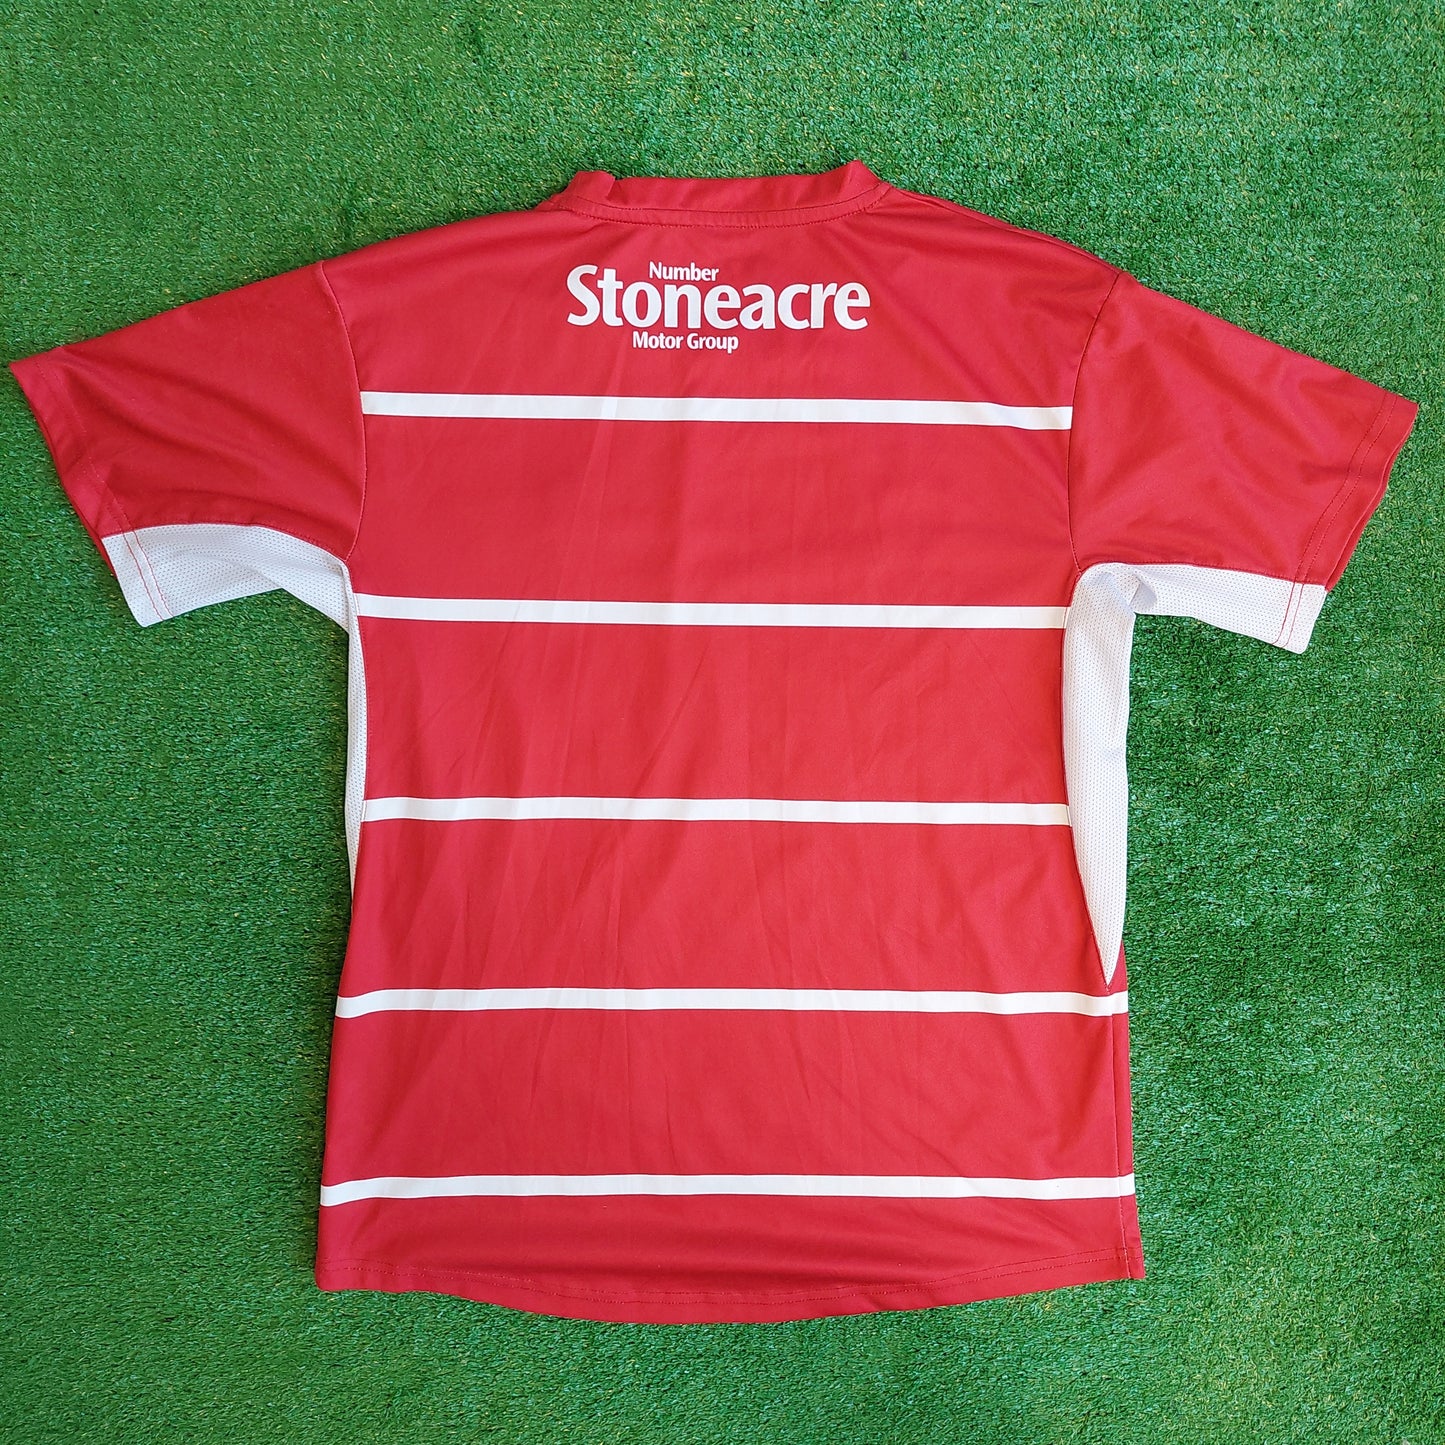 Doncaster Rovers 2021/22 Home Shirt (Excellent) - Size S